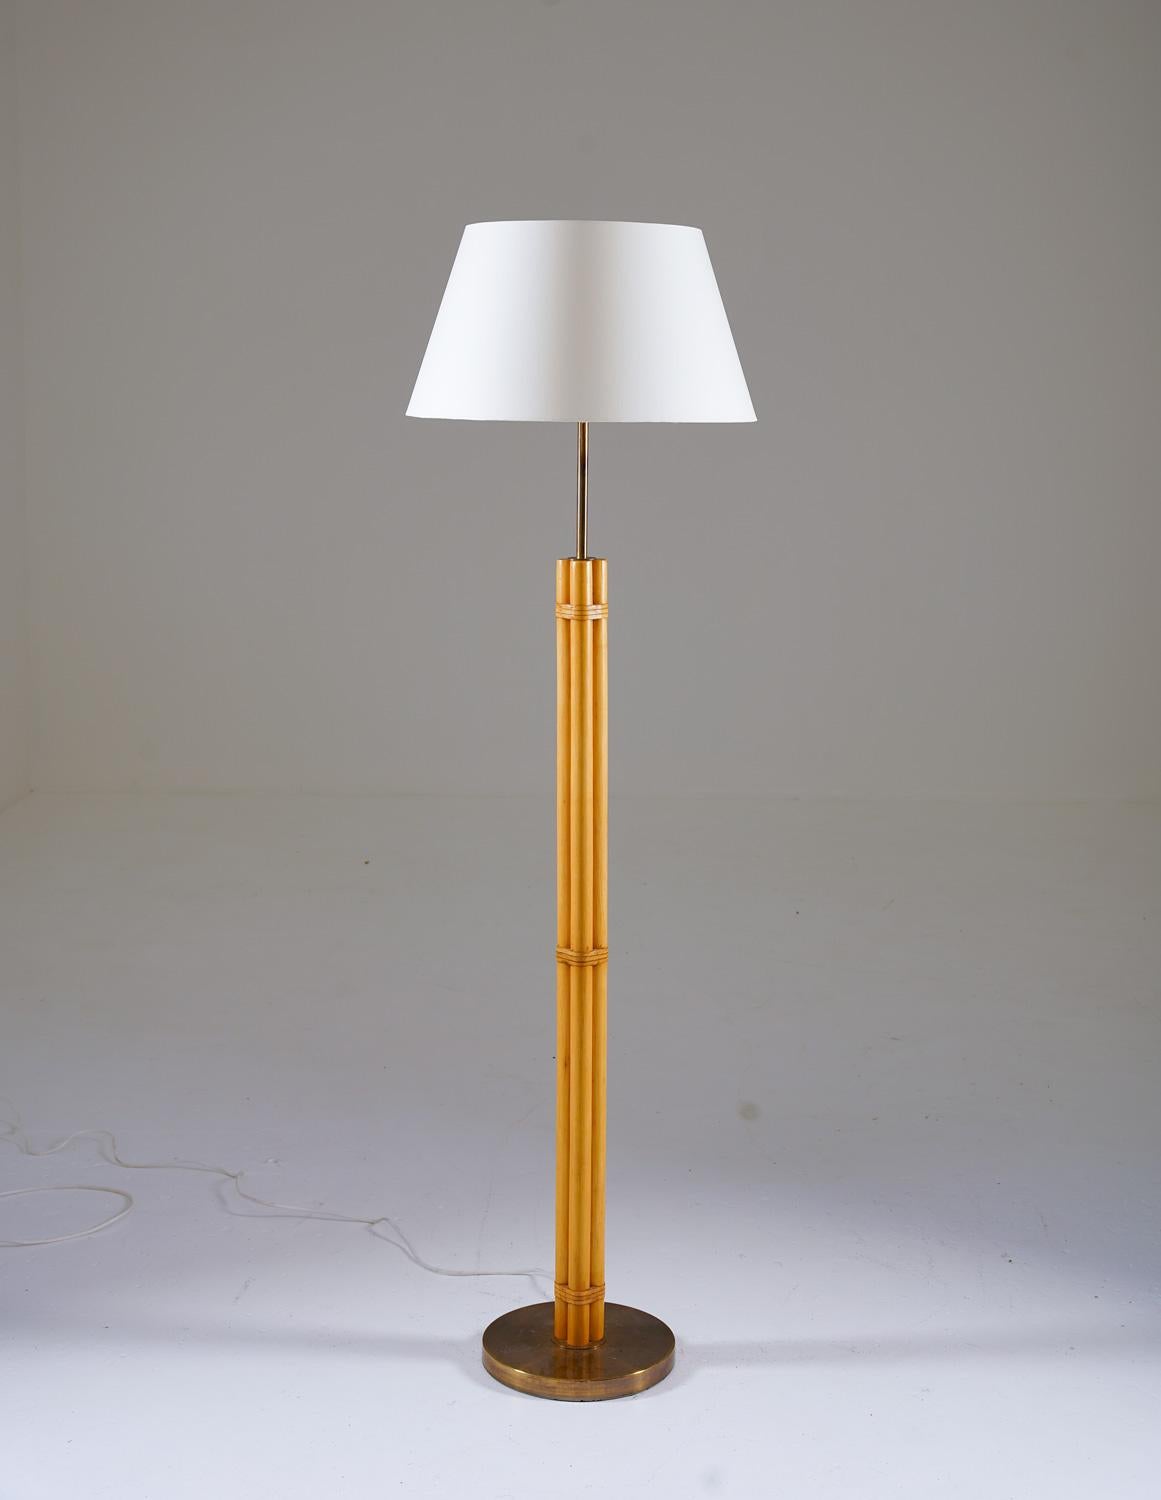 Scandinavian midcentury floor lamp in brass and bamboo by Bergboms, Sweden, 1960s.
This lamp is made of bamboo with details in brass and leather. The lamp comes with a new high-quality shade in off-white satin fabric.

Condition: Excellent